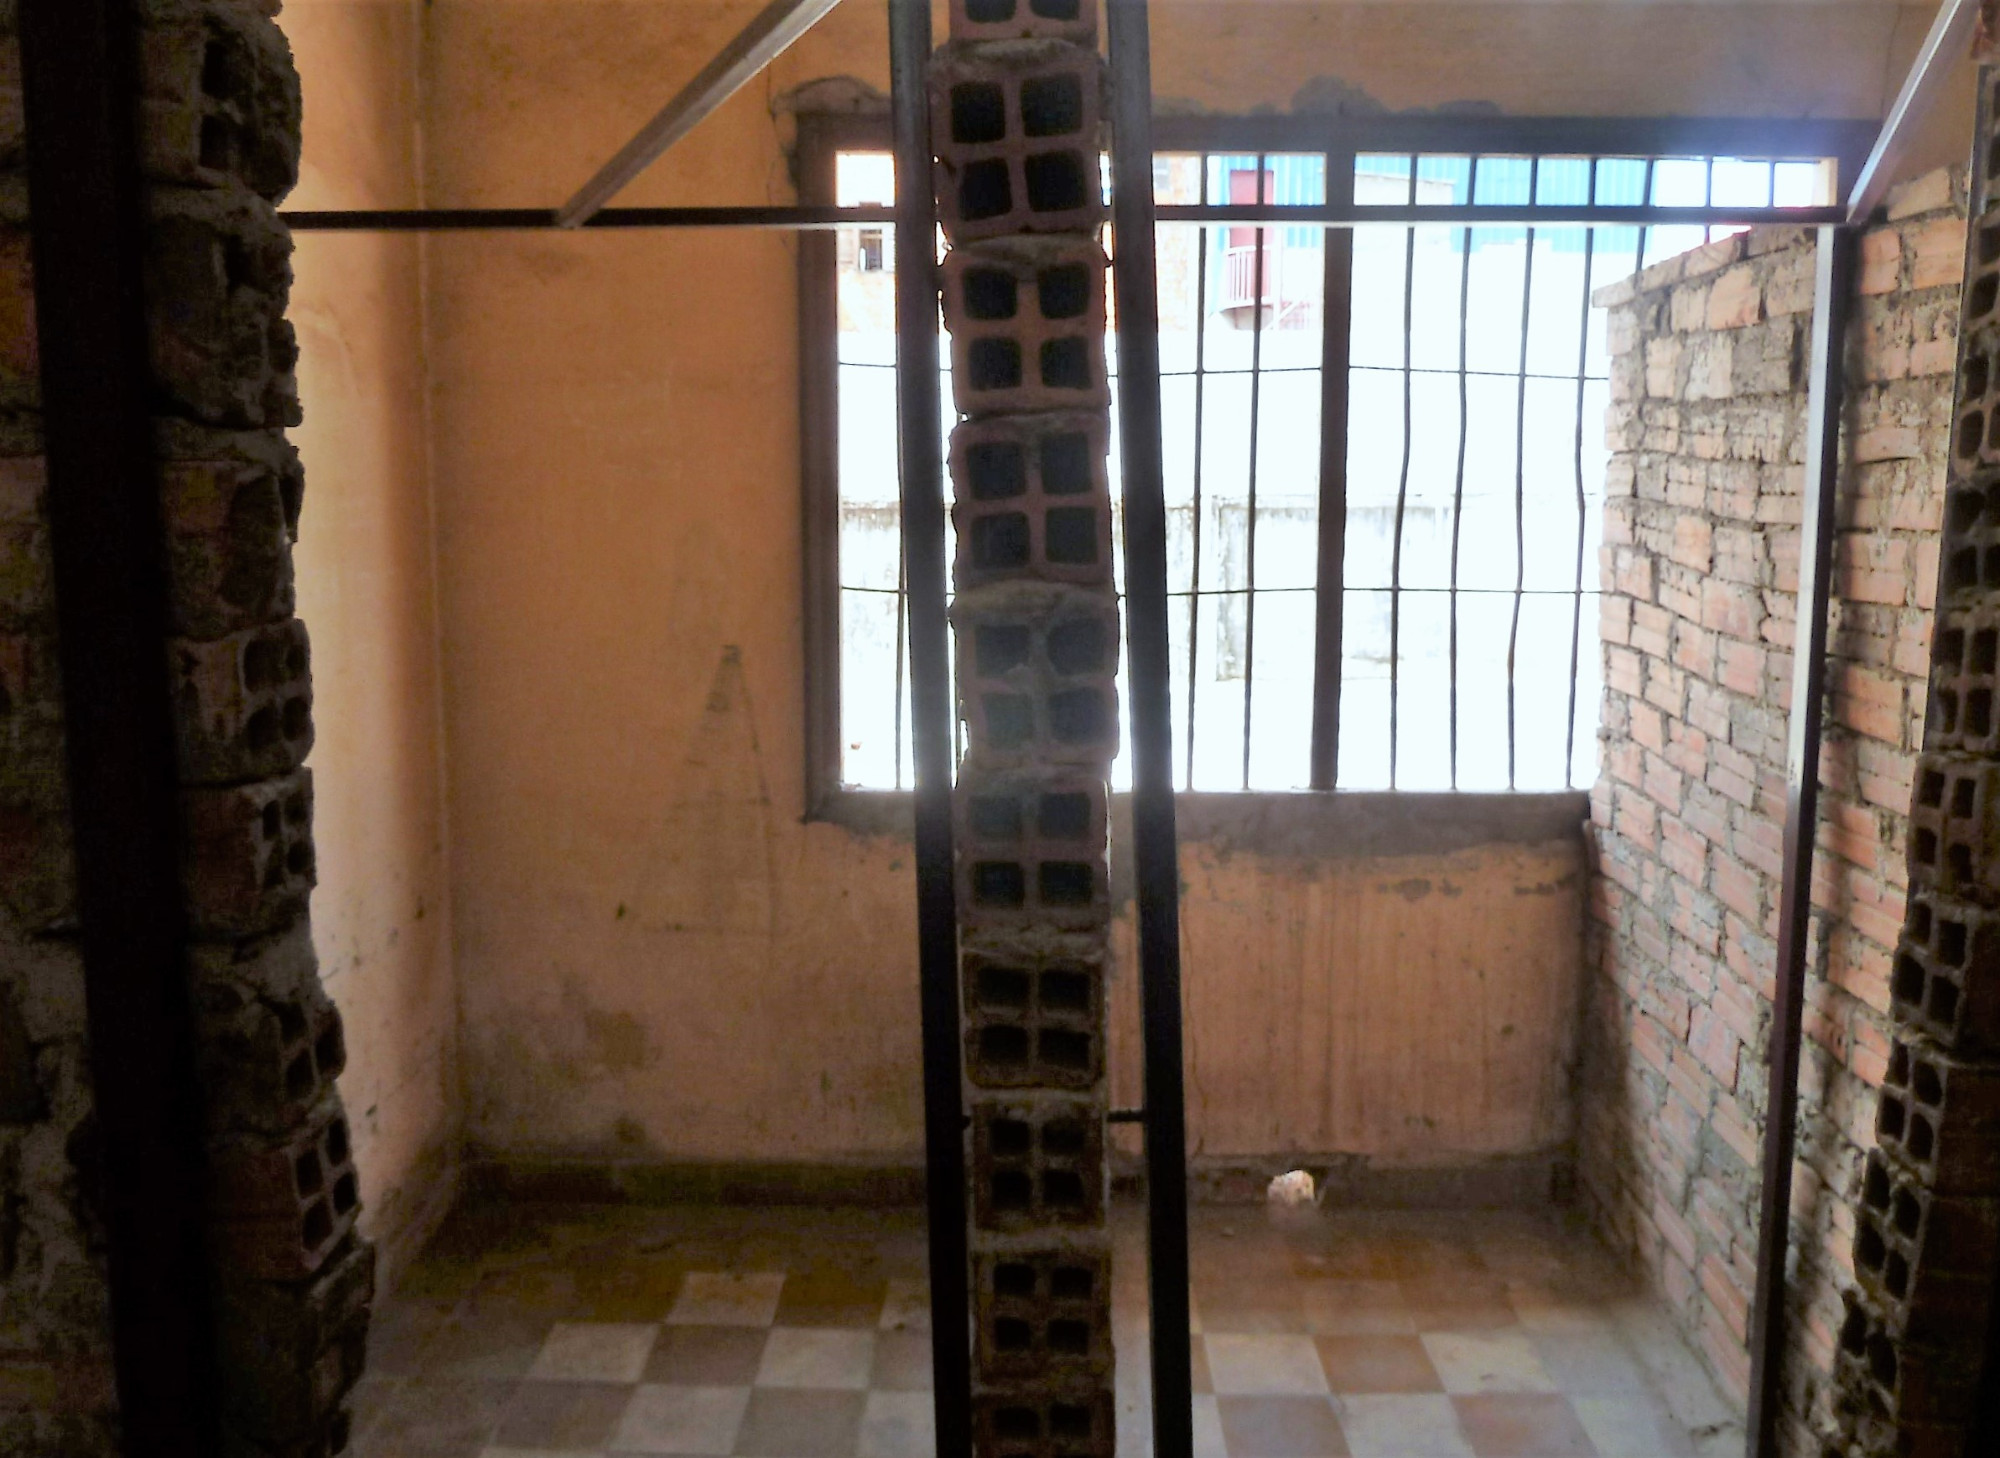 Tuol Sleng Genocide Museum, Камбоджа